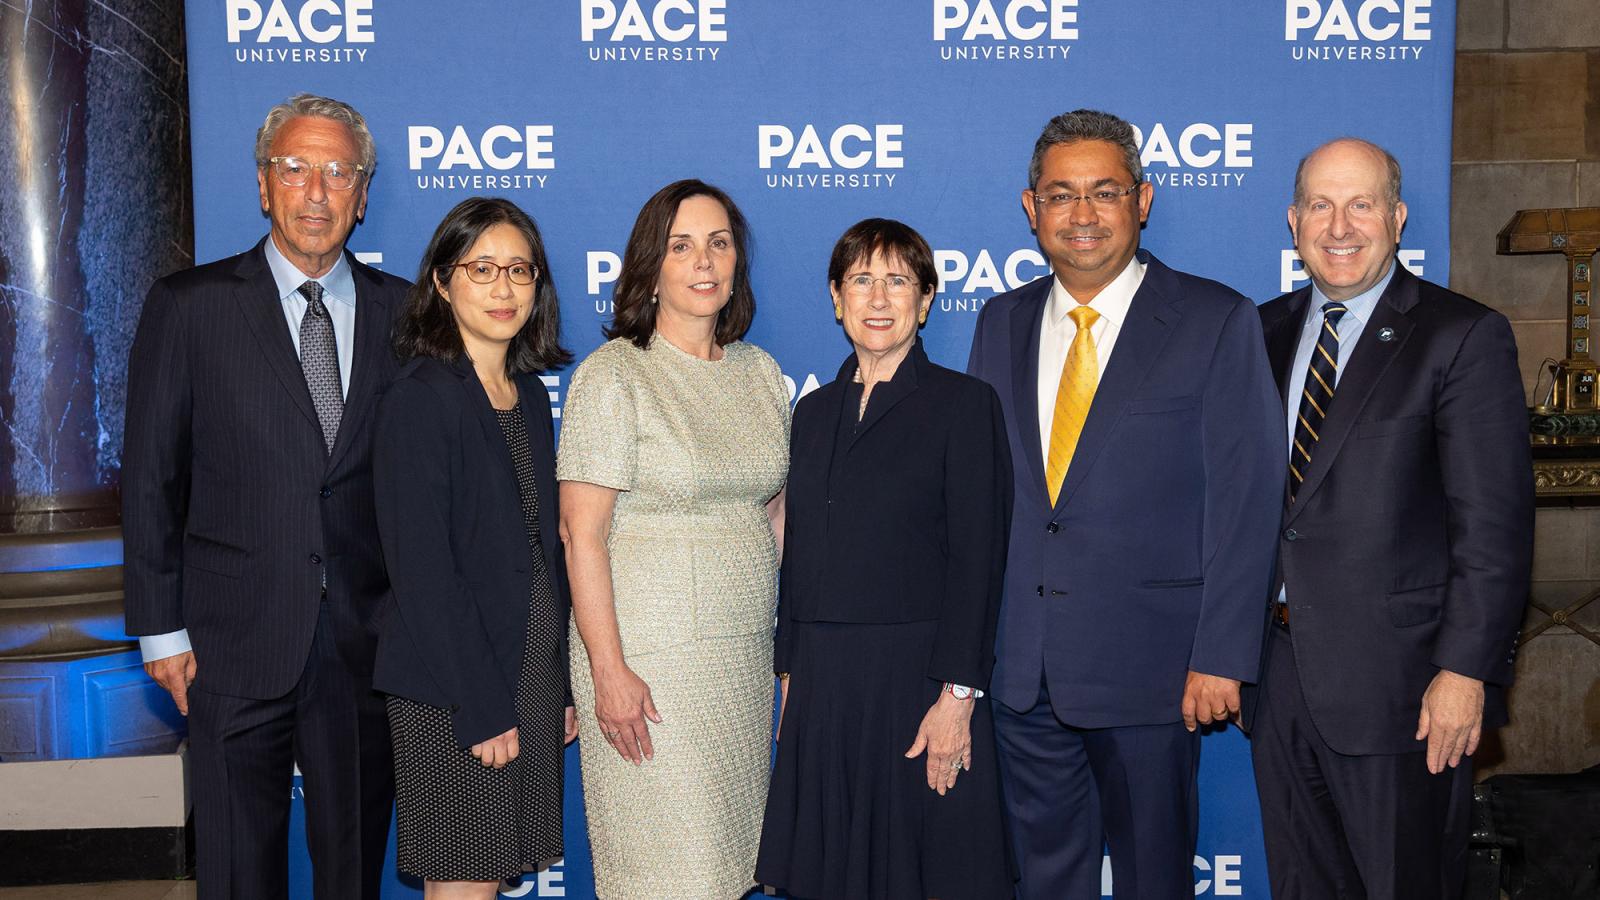 group photo with Marvin Krislov at the Spirit of Pace Awards